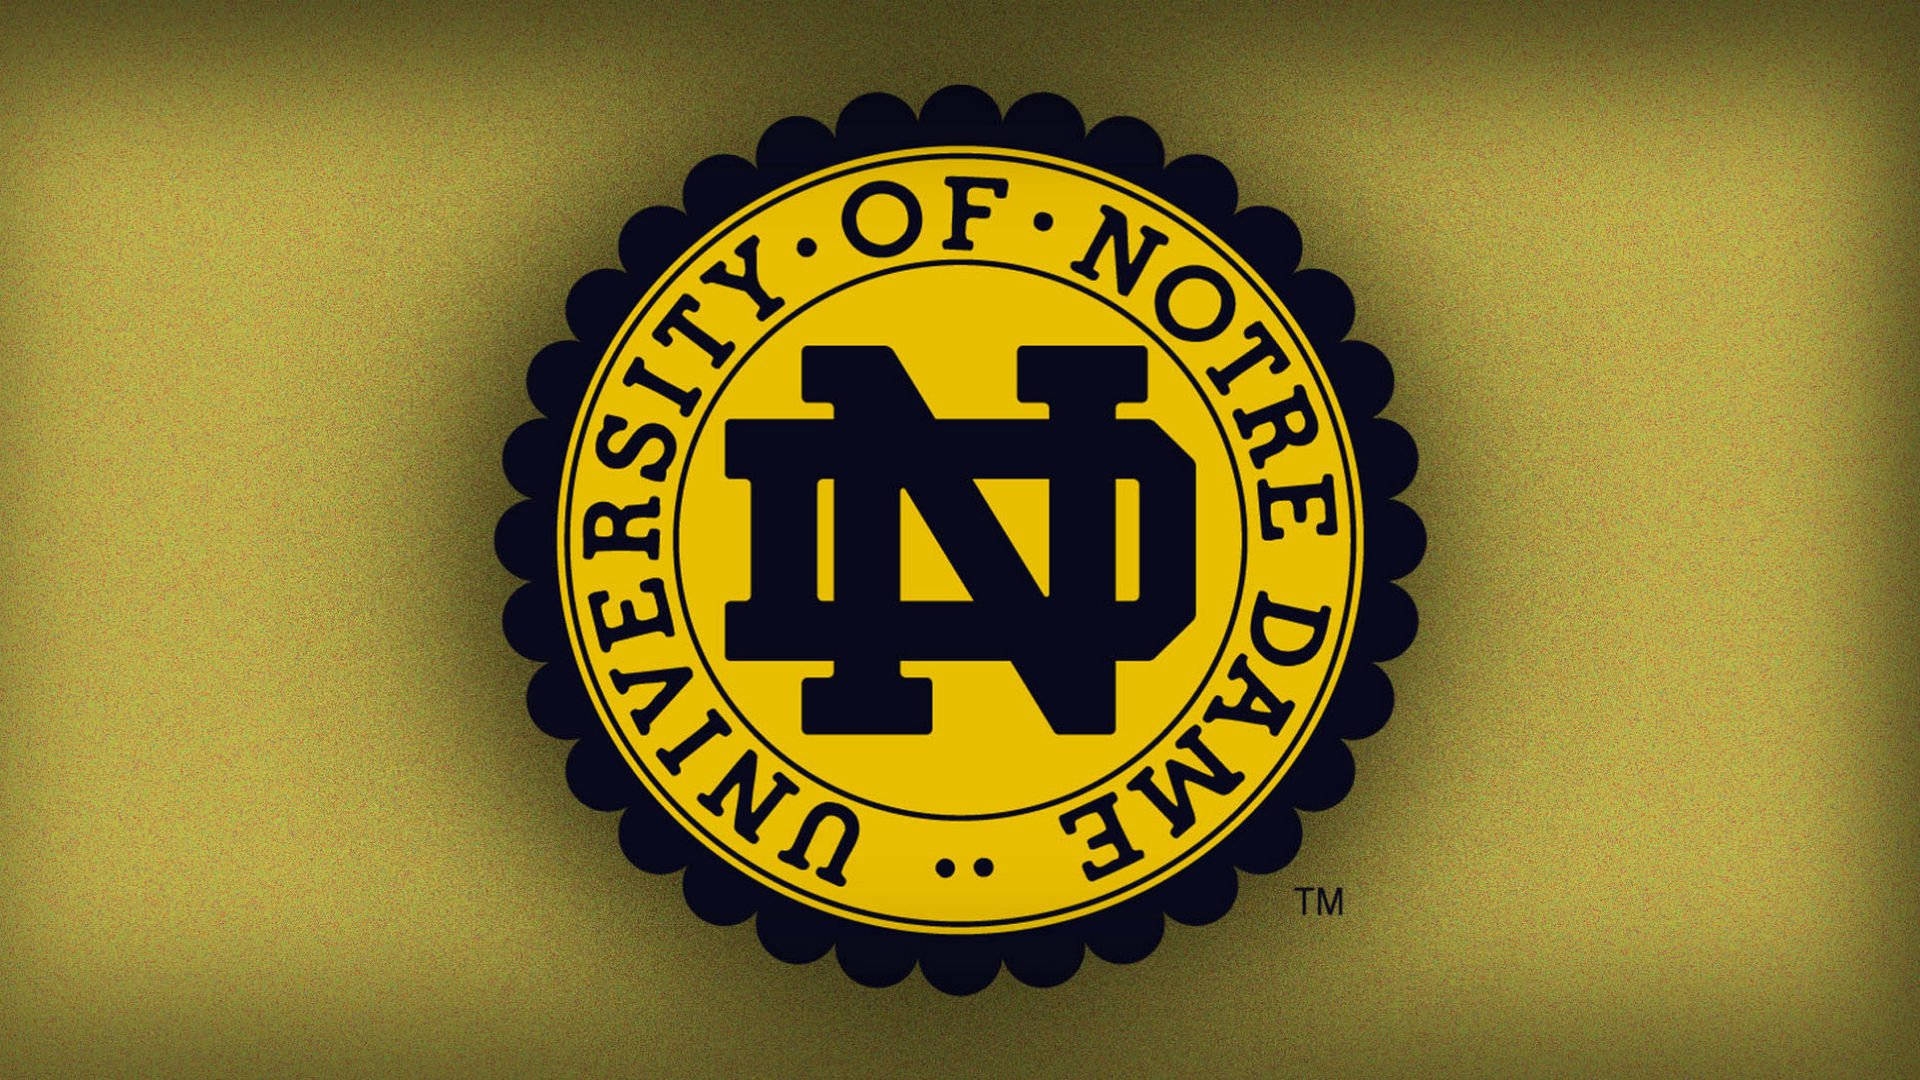 The University Of Notre Dame Logo Is Shown On A Yellow Background Wallpaper